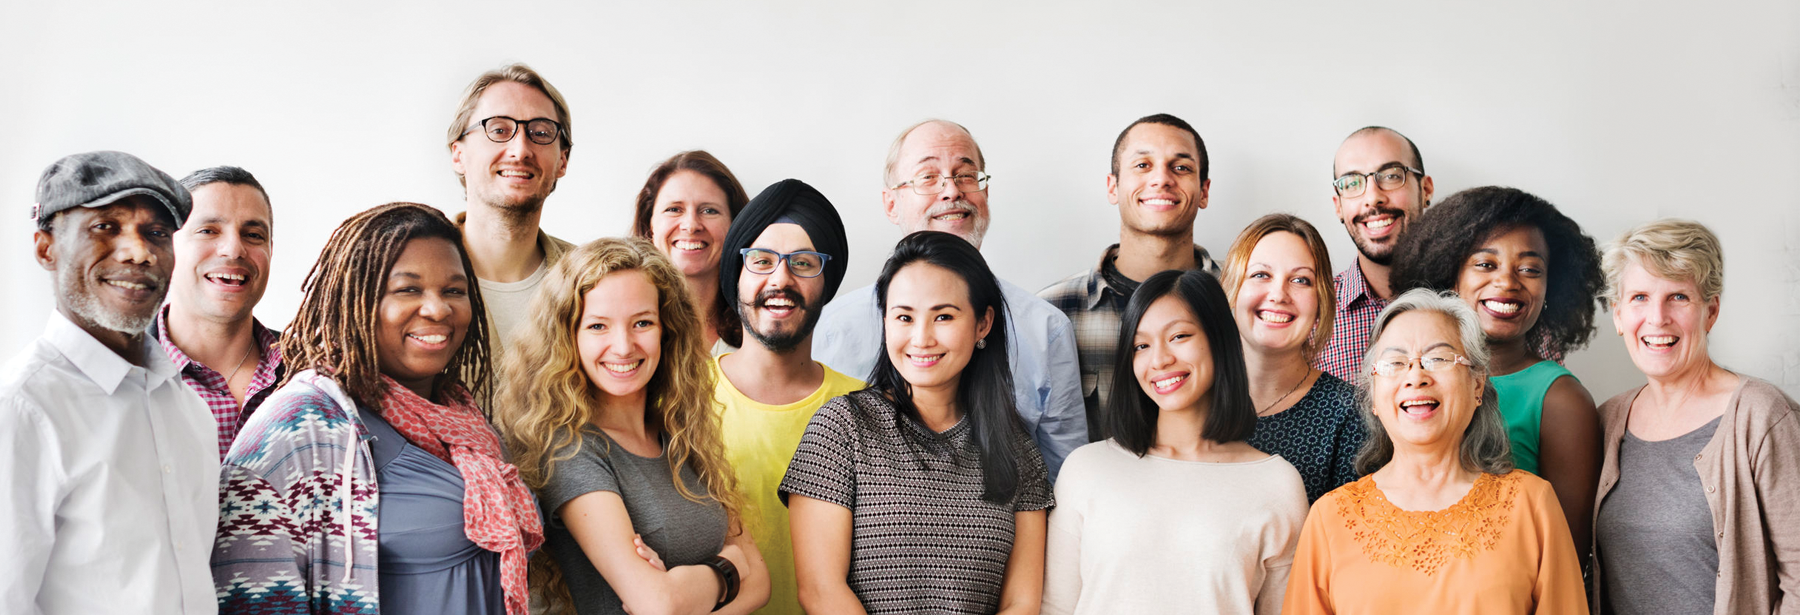 Large group of diverse people smiling against a white background